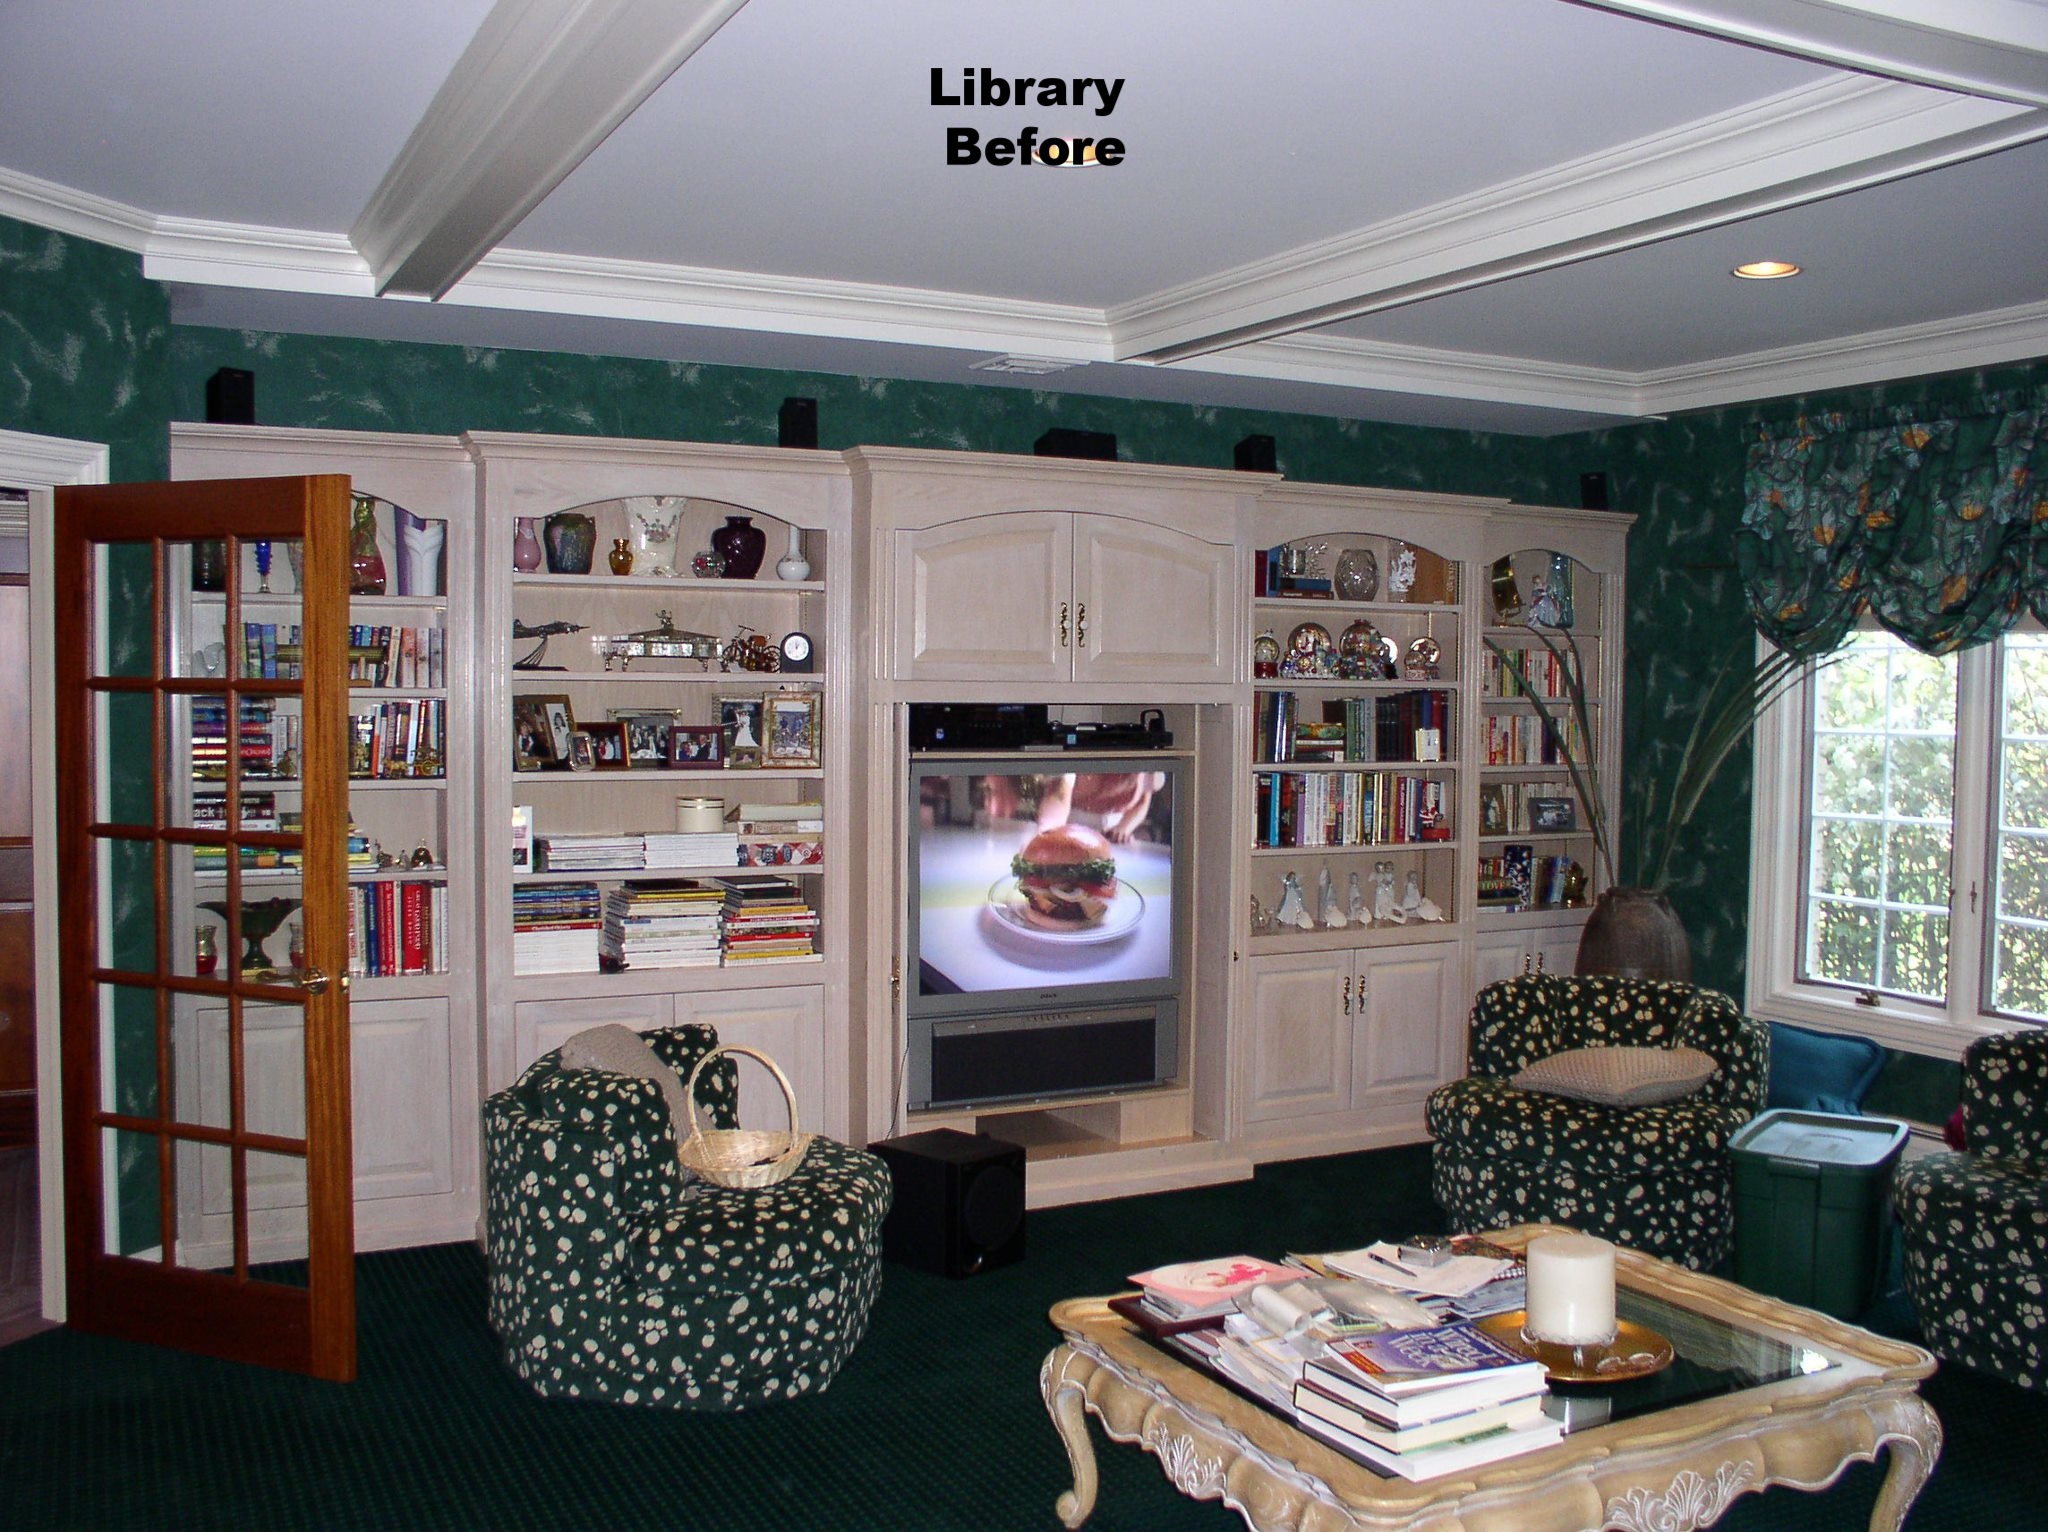 LIBRARY BEFORE